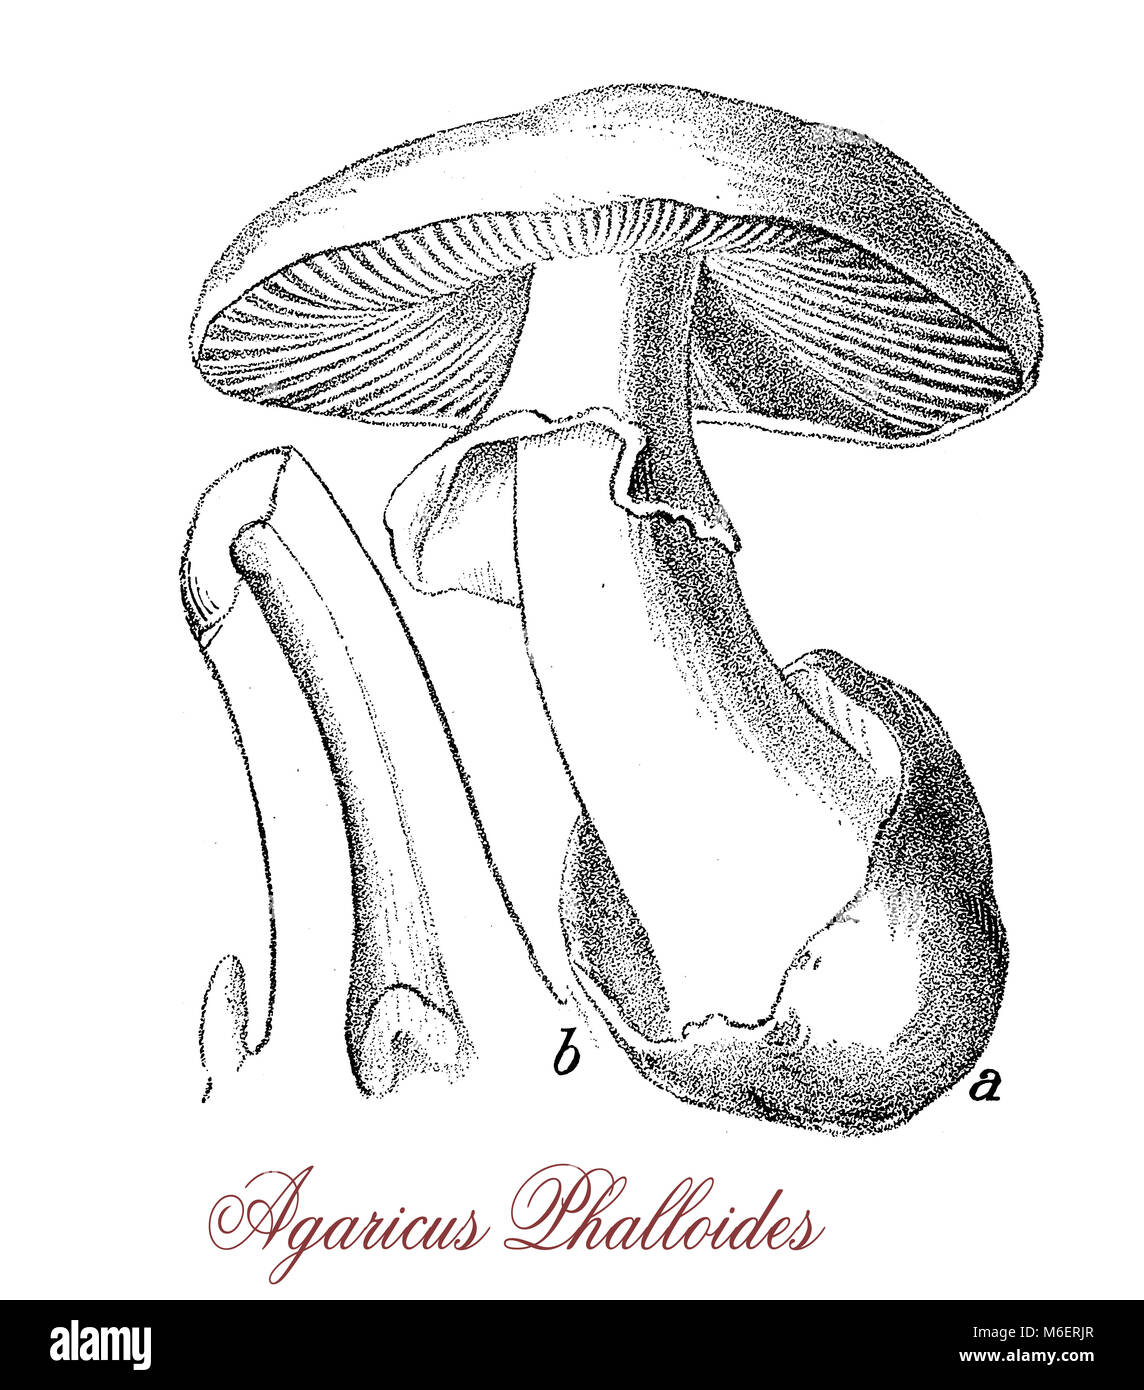 Vintage engraving of Amanita phalloides or death cap,deadly poisonous  fungus very similar to edible mushrooms with risk of accidental poisoning Stock Photo